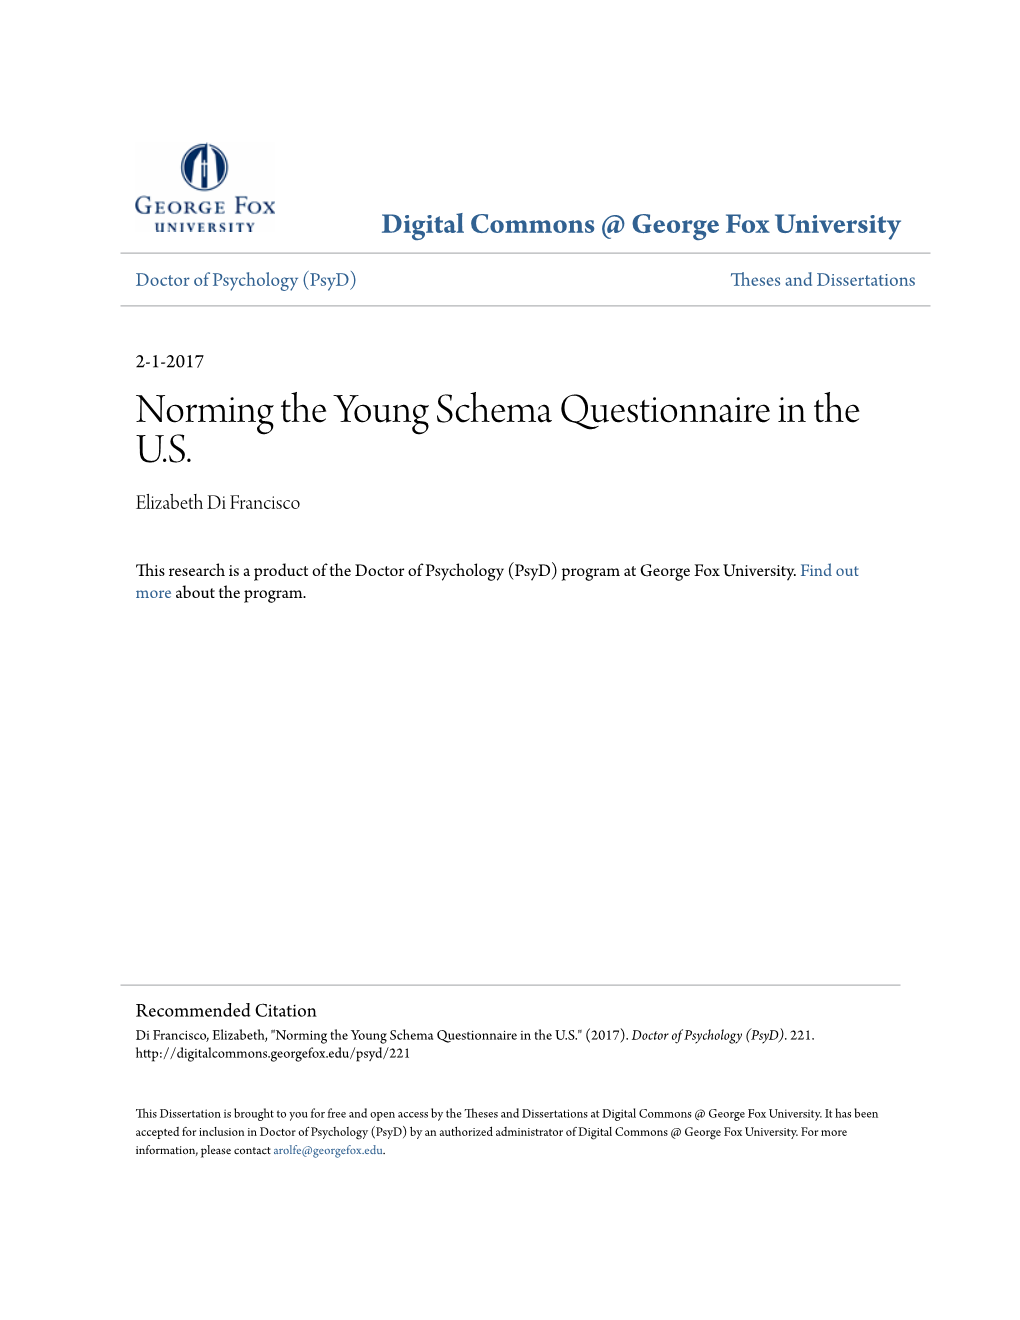 Norming the Young Schema Questionnaire in the U.S. Elizabeth Di Francisco